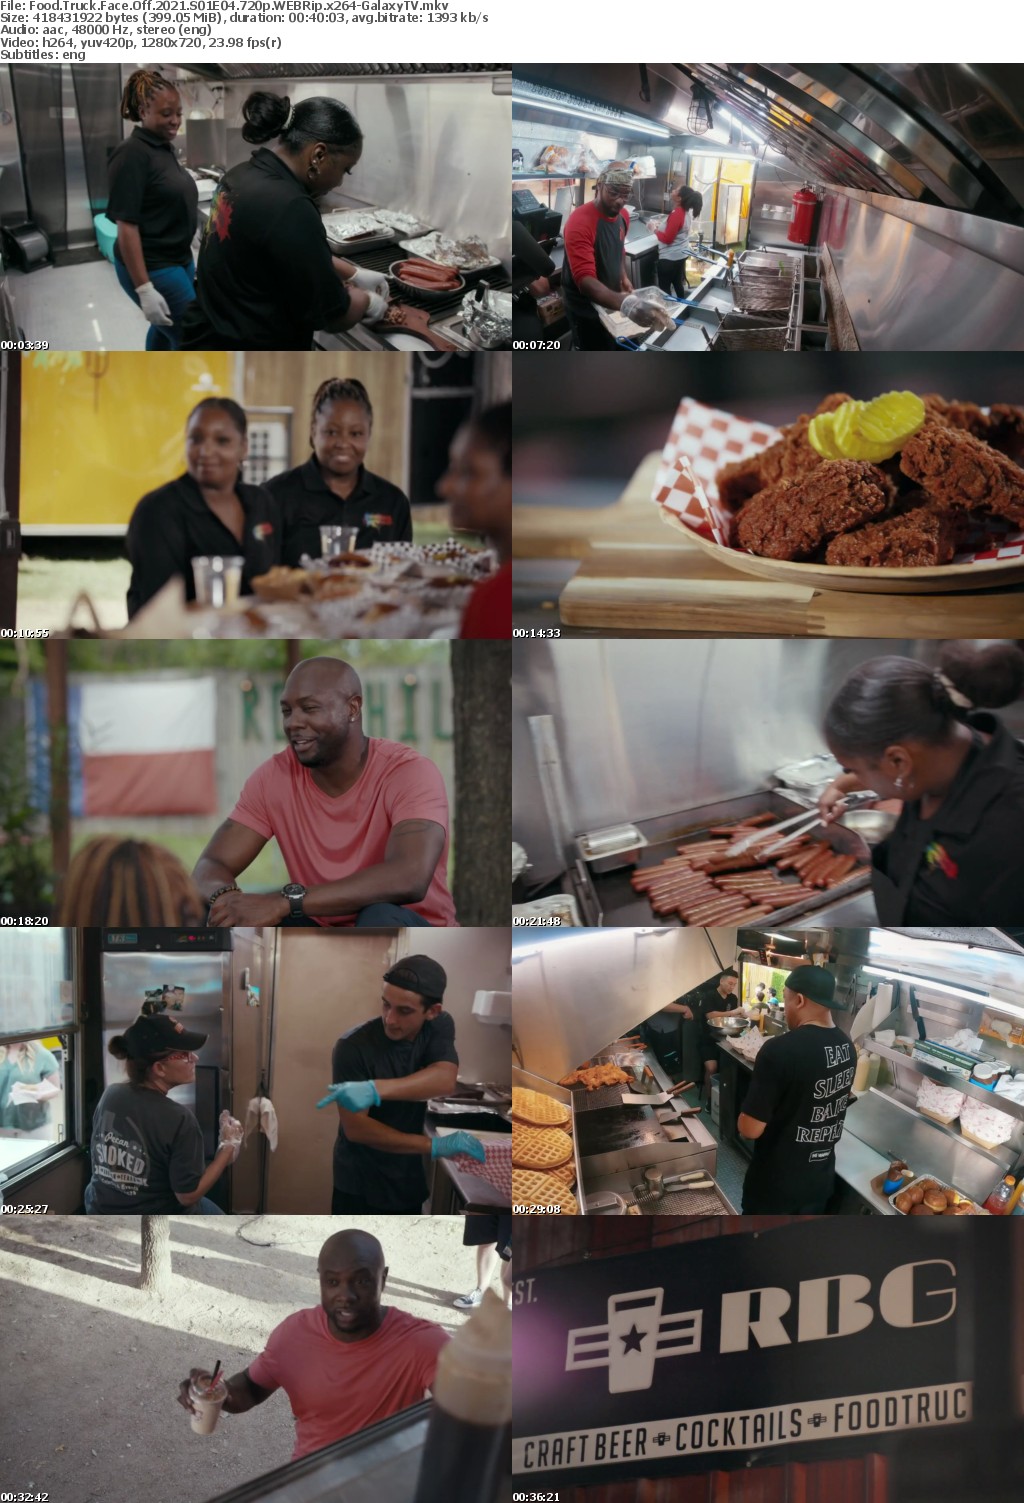 Food Truck Face Off 2021 S01 COMPLETE 720p WEBRip x264-GalaxyTV